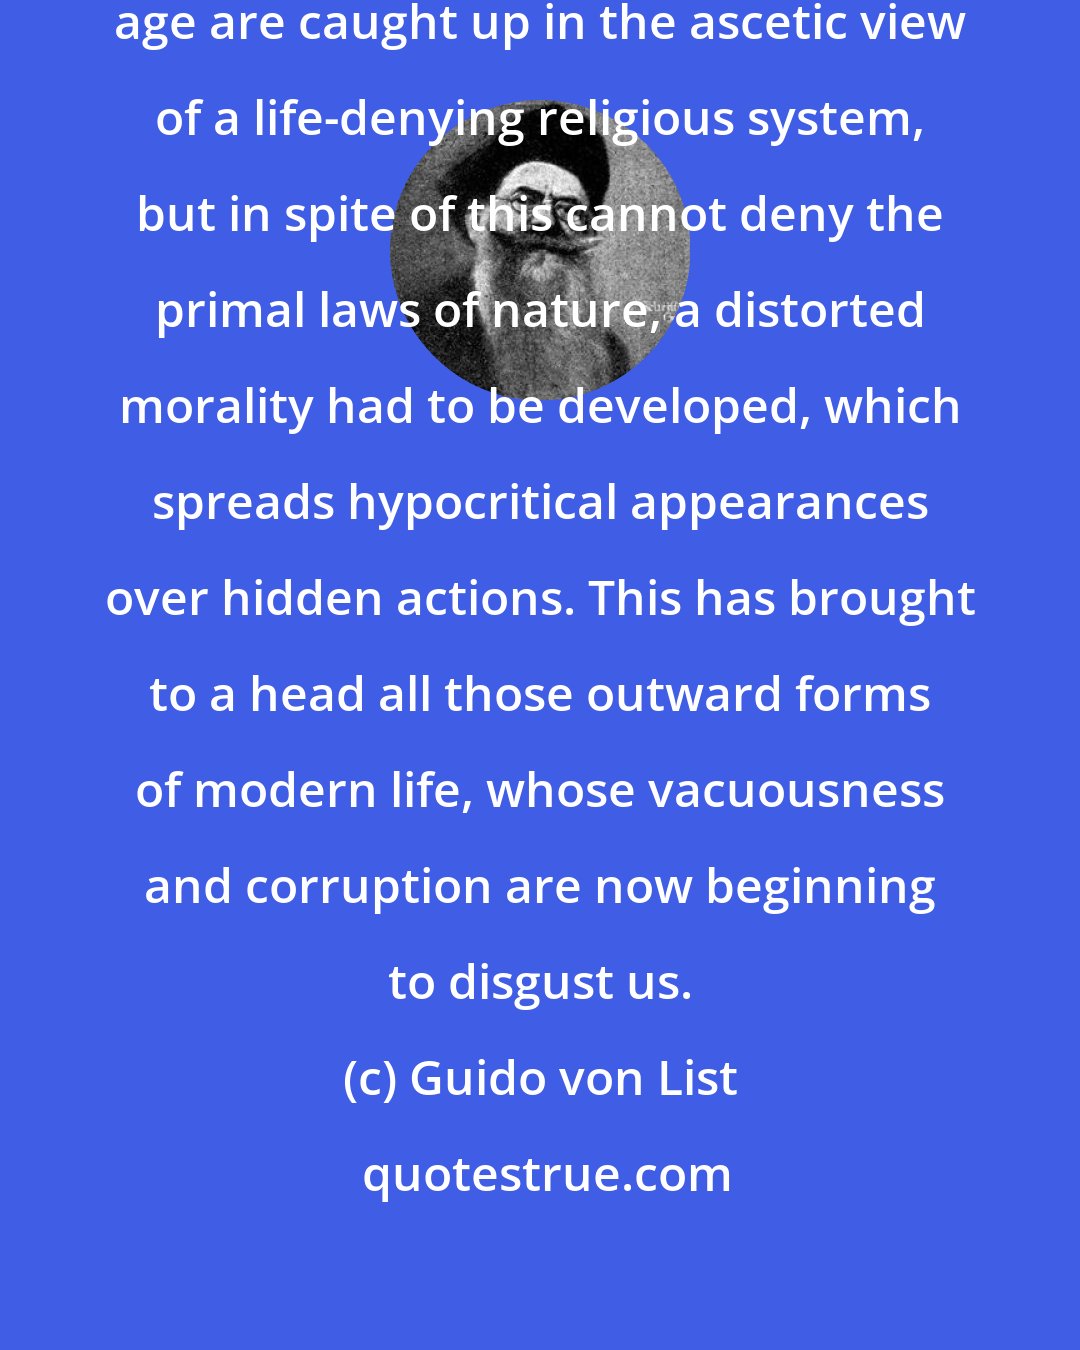 Guido von List: Now, because men of our contemporary age are caught up in the ascetic view of a life-denying religious system, but in spite of this cannot deny the primal laws of nature, a distorted morality had to be developed, which spreads hypocritical appearances over hidden actions. This has brought to a head all those outward forms of modern life, whose vacuousness and corruption are now beginning to disgust us.